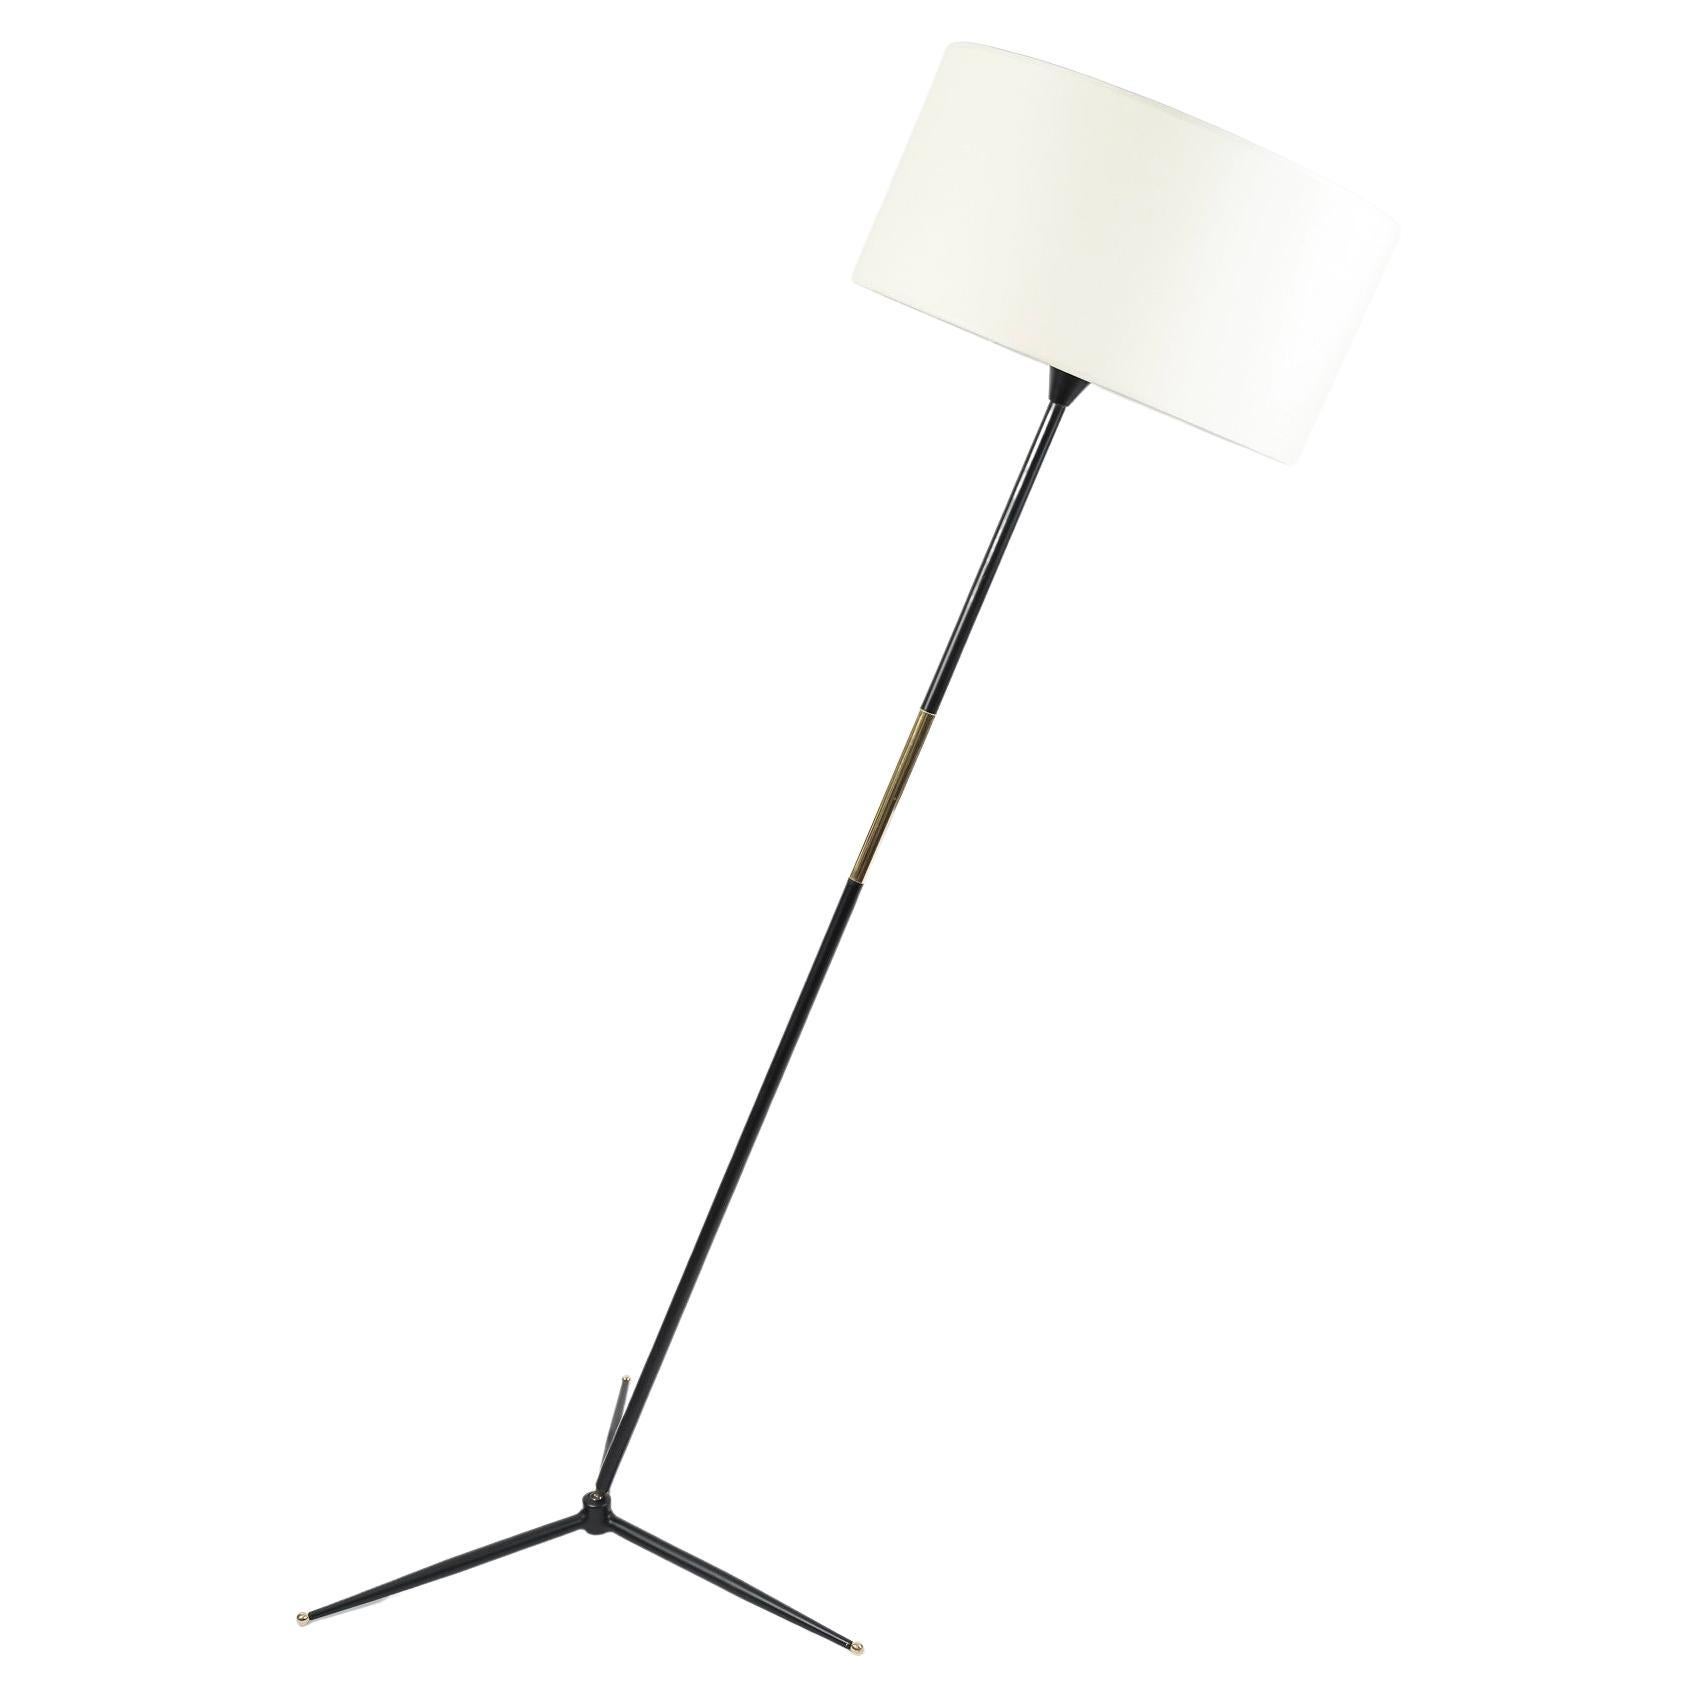 Composed of a central stem in blackened brass embellished with a gilded brass handle located in the middle of the central stem and mounted on a ball-and-socket joint at the base of the base, allowing the floor lamp to be oriented at will.
It stands